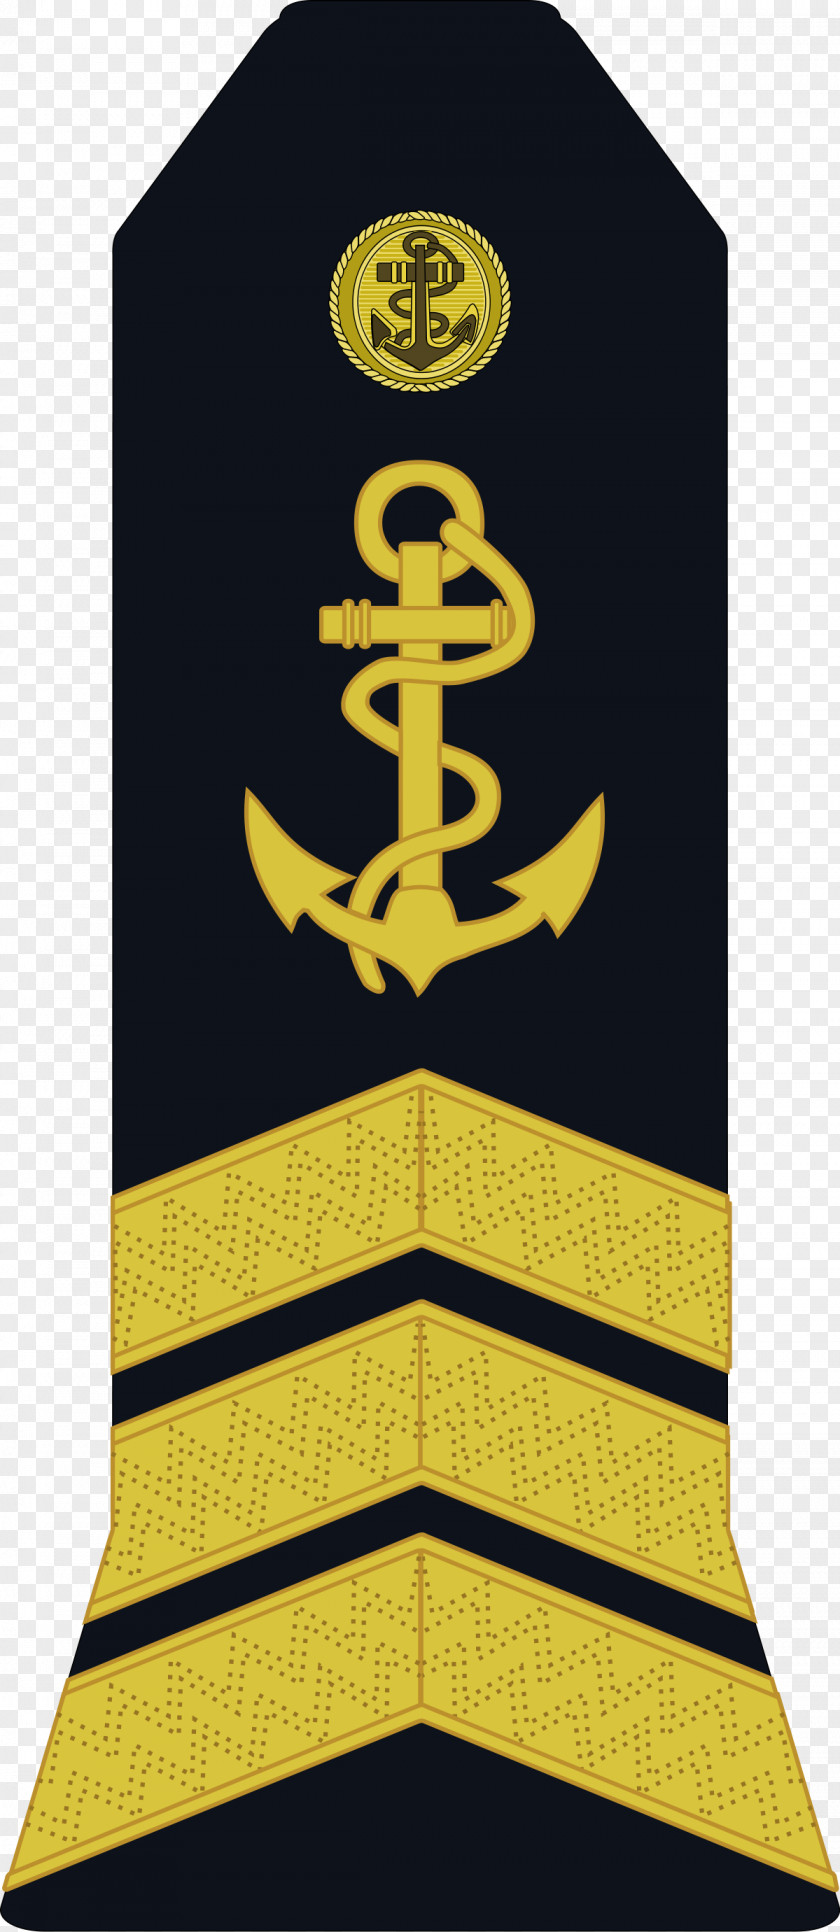 Military Rank Petty Officer French Navy PNG